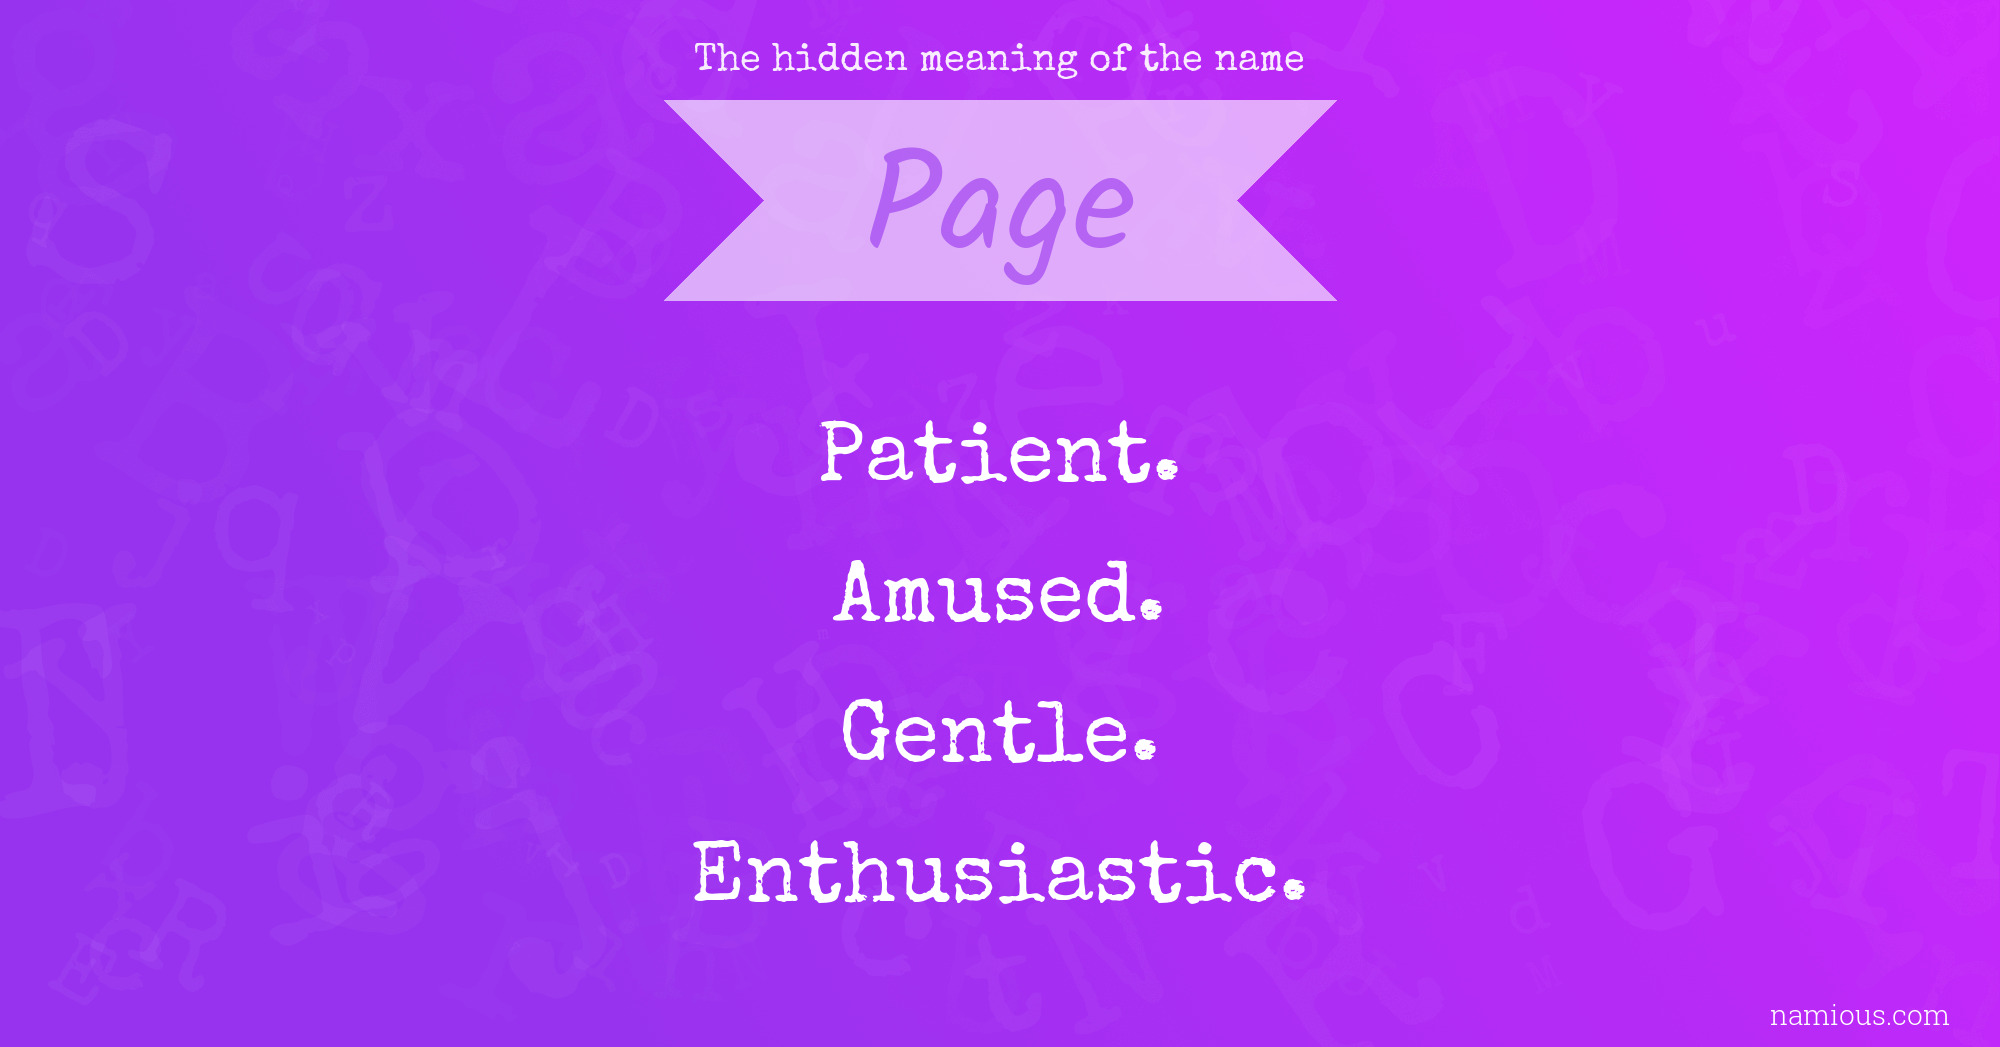 The hidden meaning of the name Page